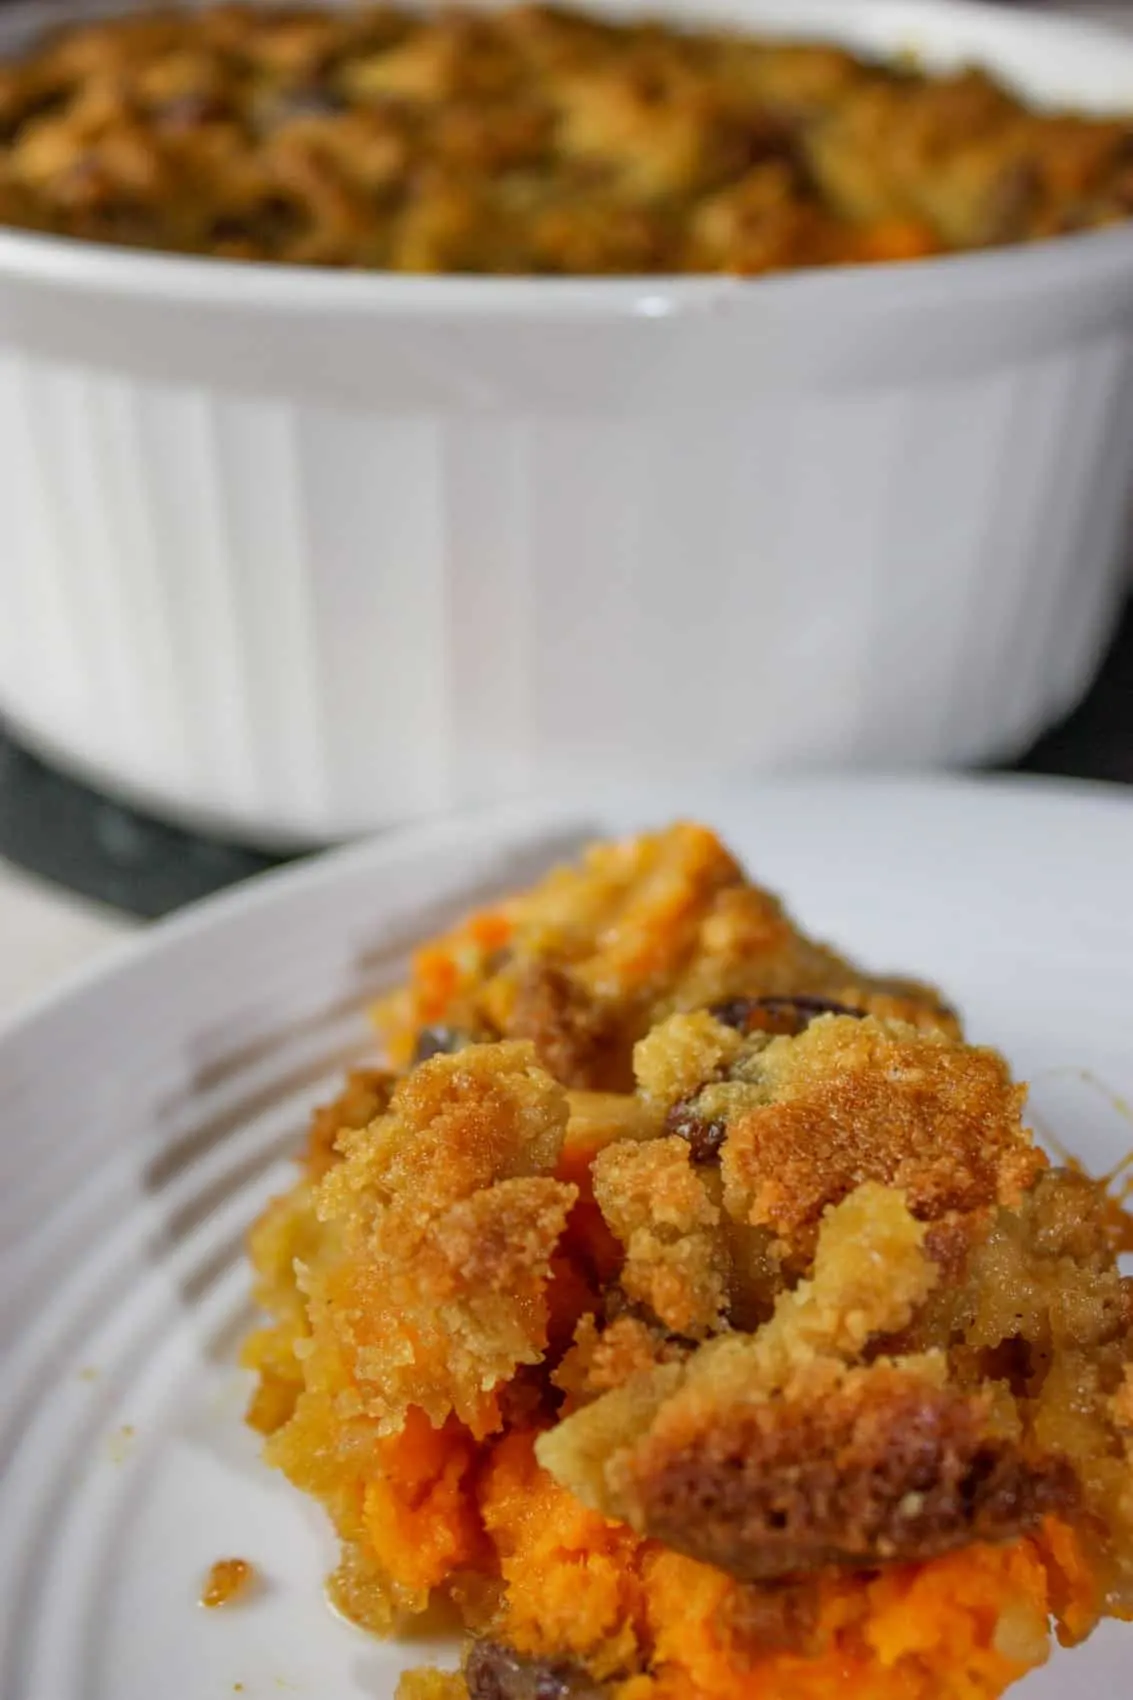 Sweet Potato is a versatile side dish.  This crumble version boosts the flavour with a crunchy topping loaded with brown sugar and pecans.  